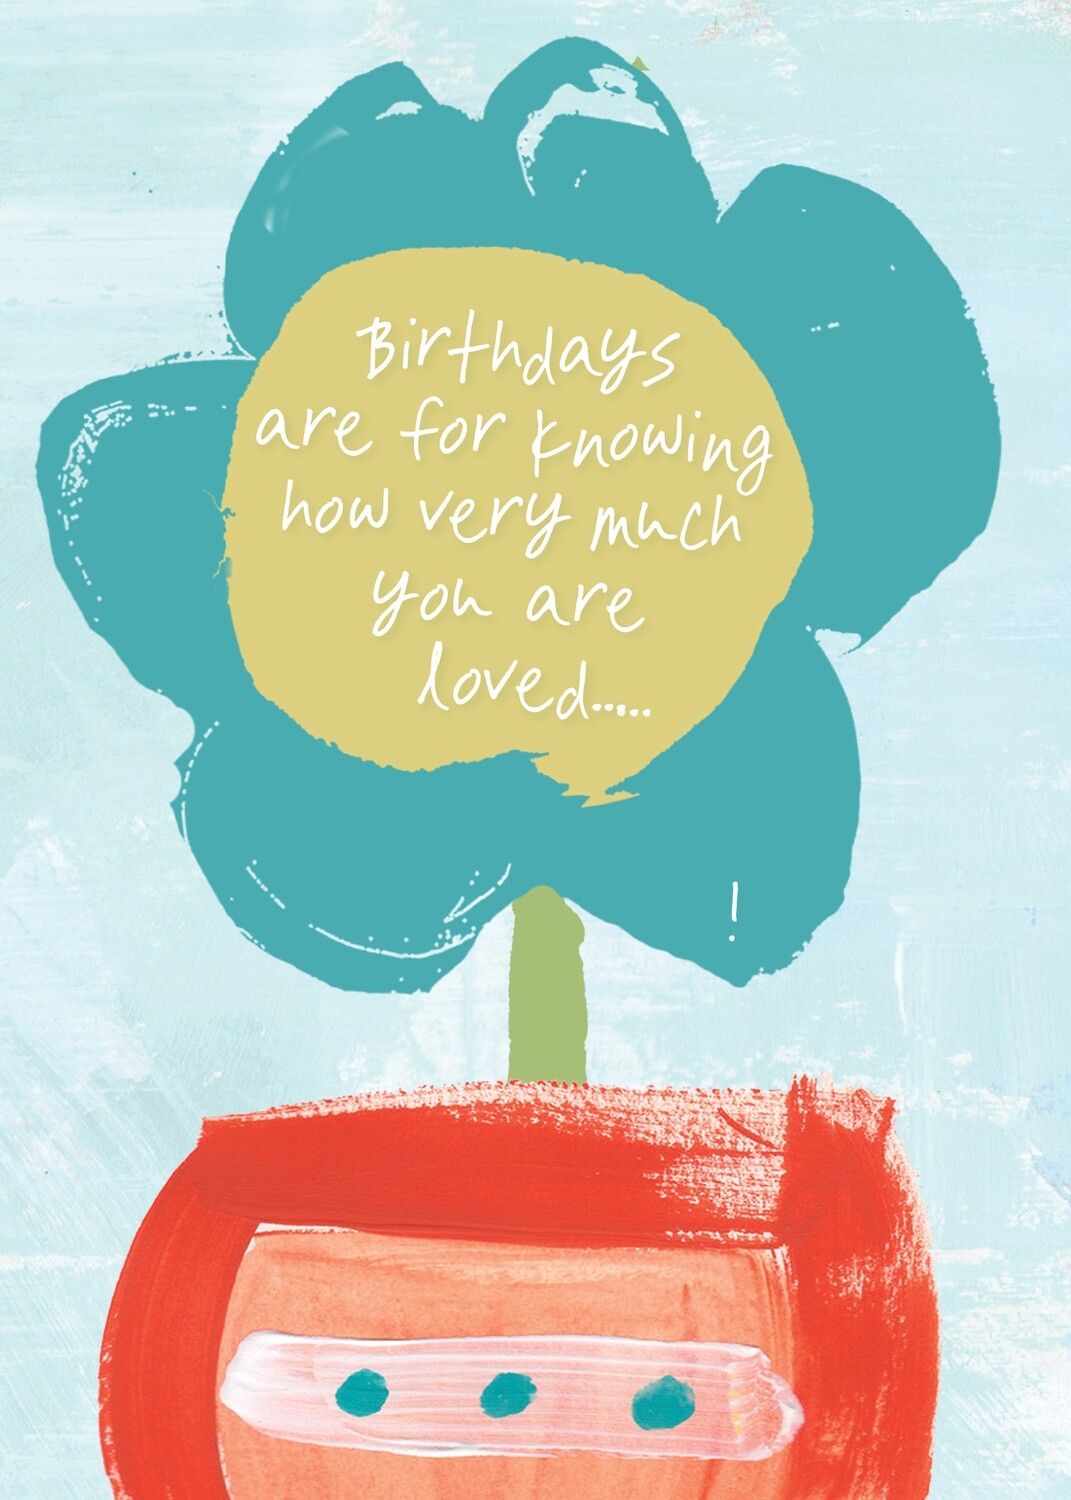 BIRTHDAY CARD - Birthdays are for Knowing